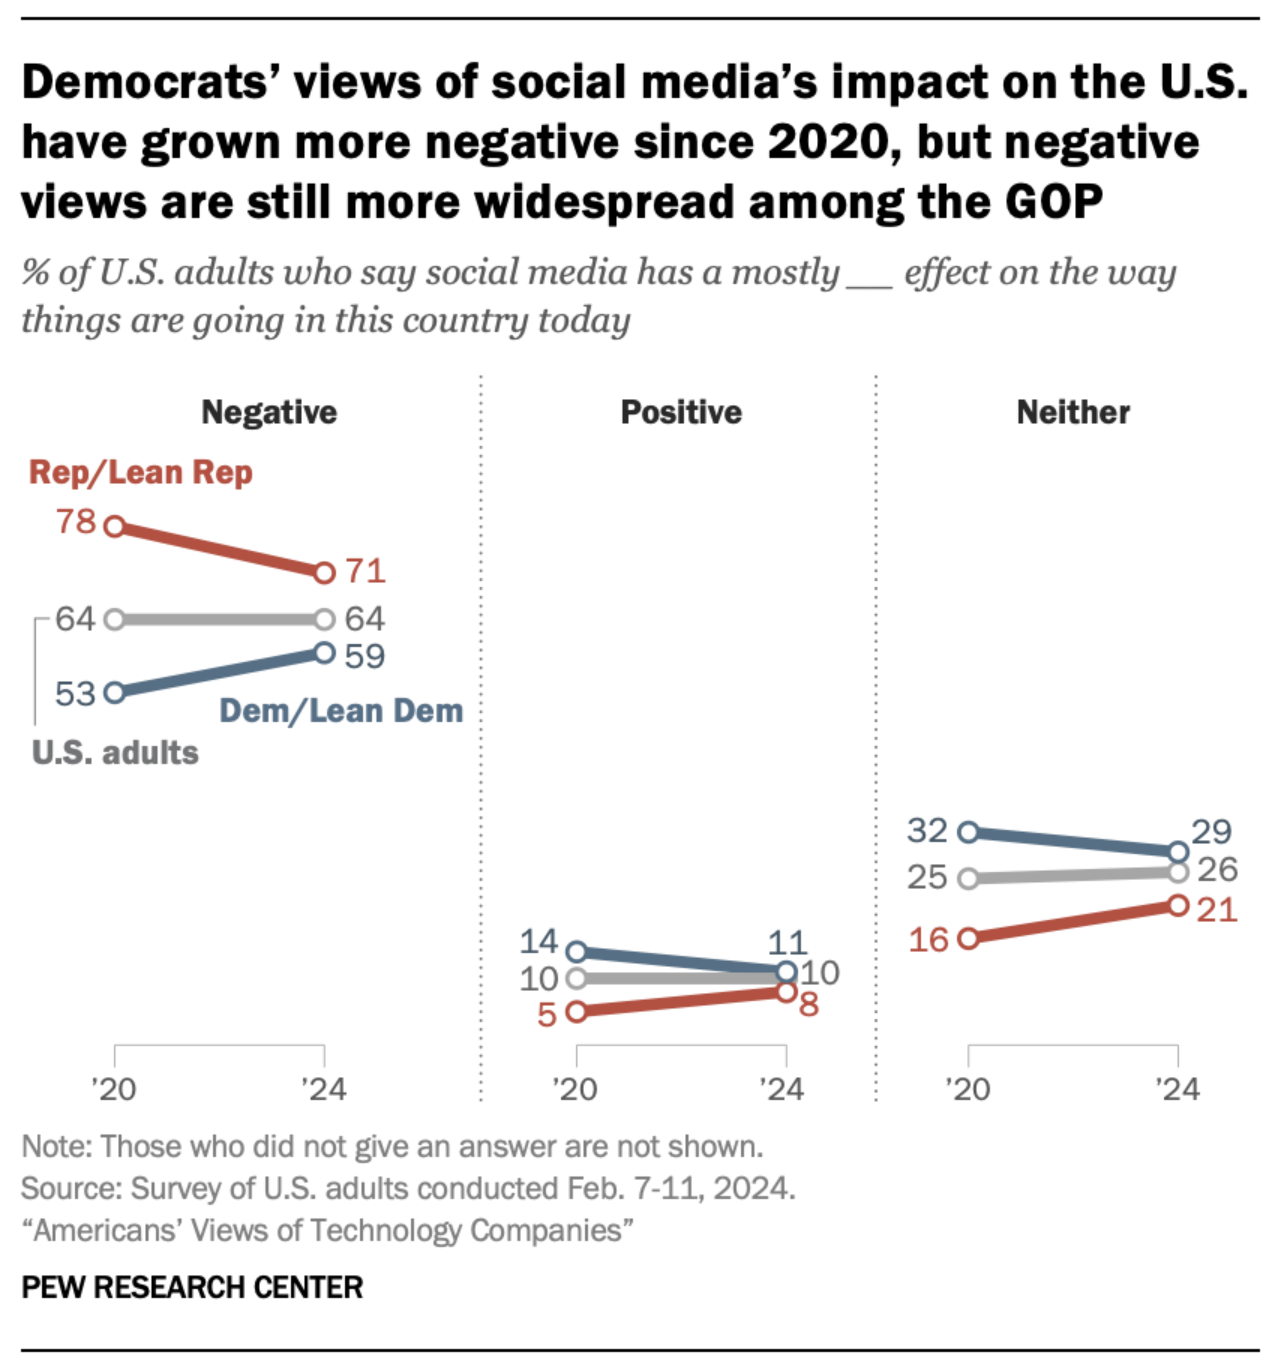 Pew Research Center has found that democrats' view of social media's impact on the U.S. have grown more negative since 2020, but negative views are still more widespread among the GOP